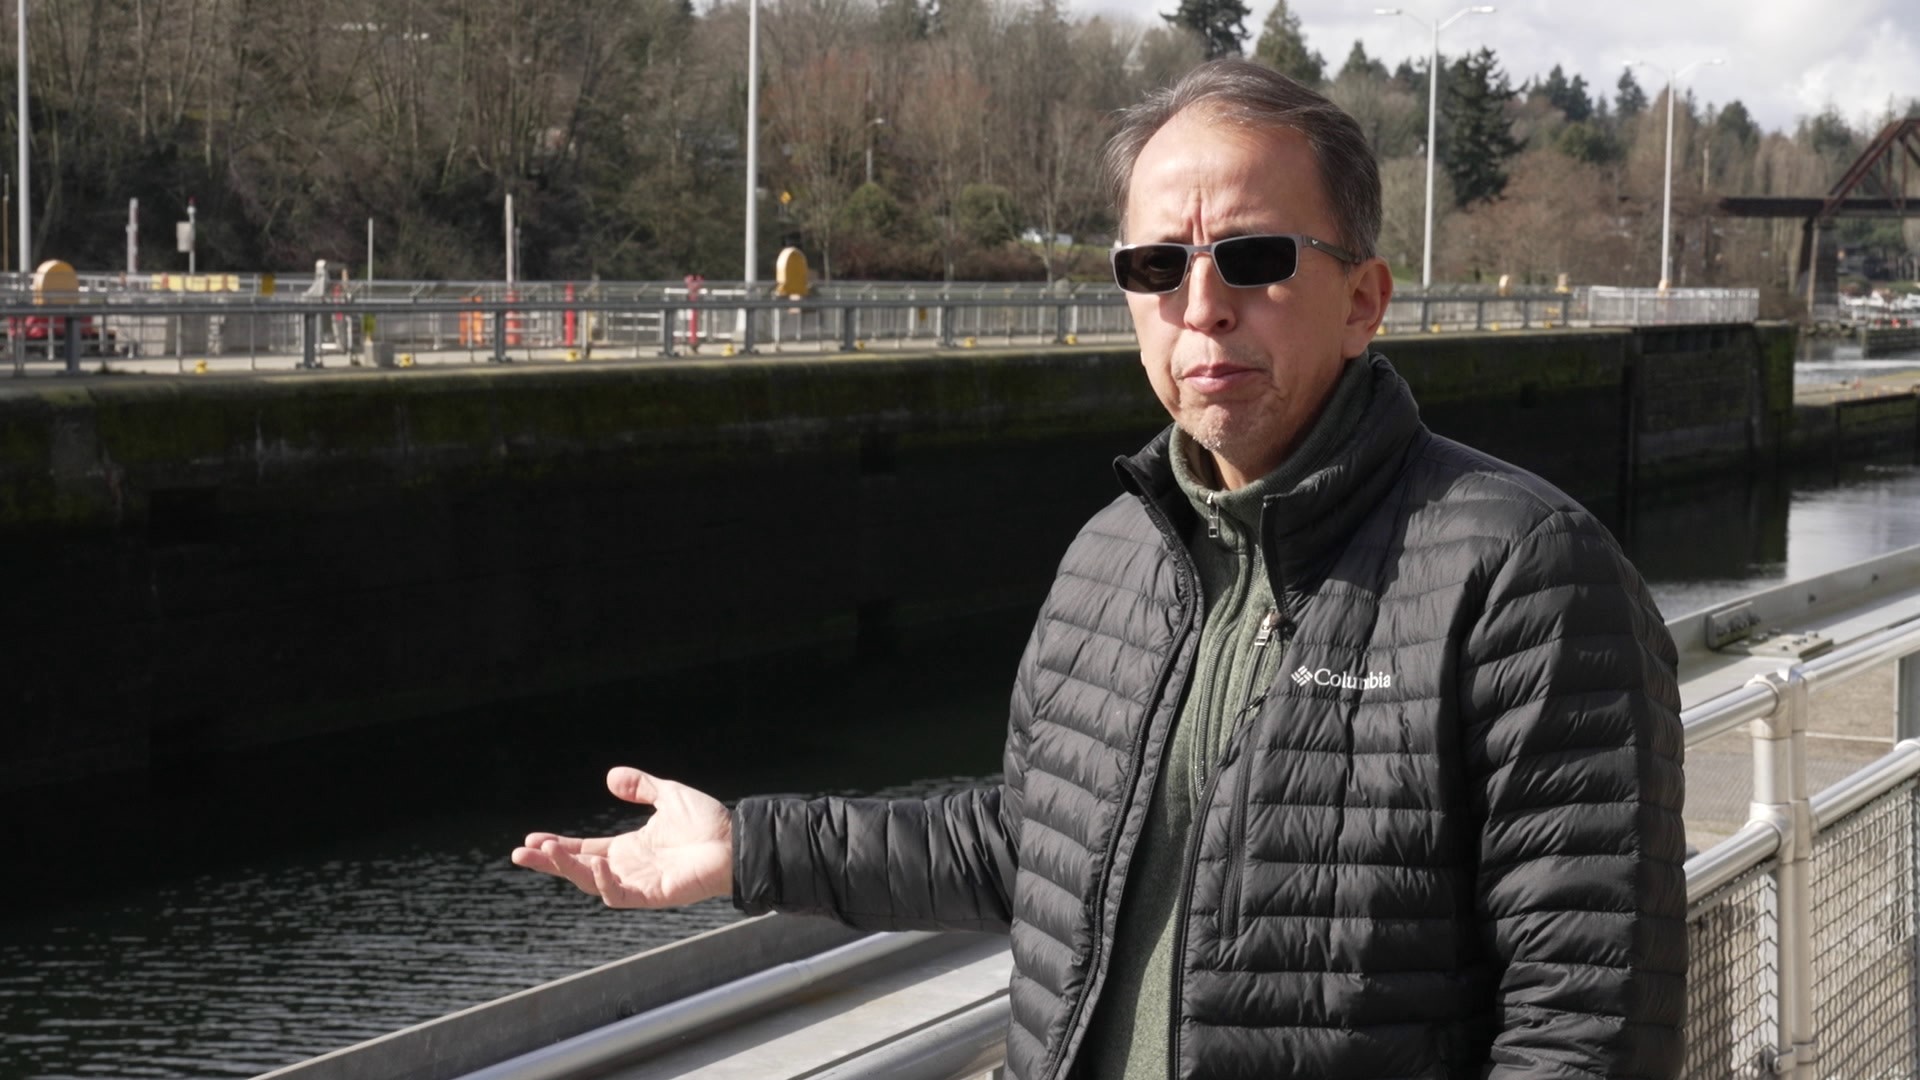 How the Ballard Locks, a well-known waterway, transformed Northwest watersheds. Sponsored by the Muckleshoot Indian Tribe.